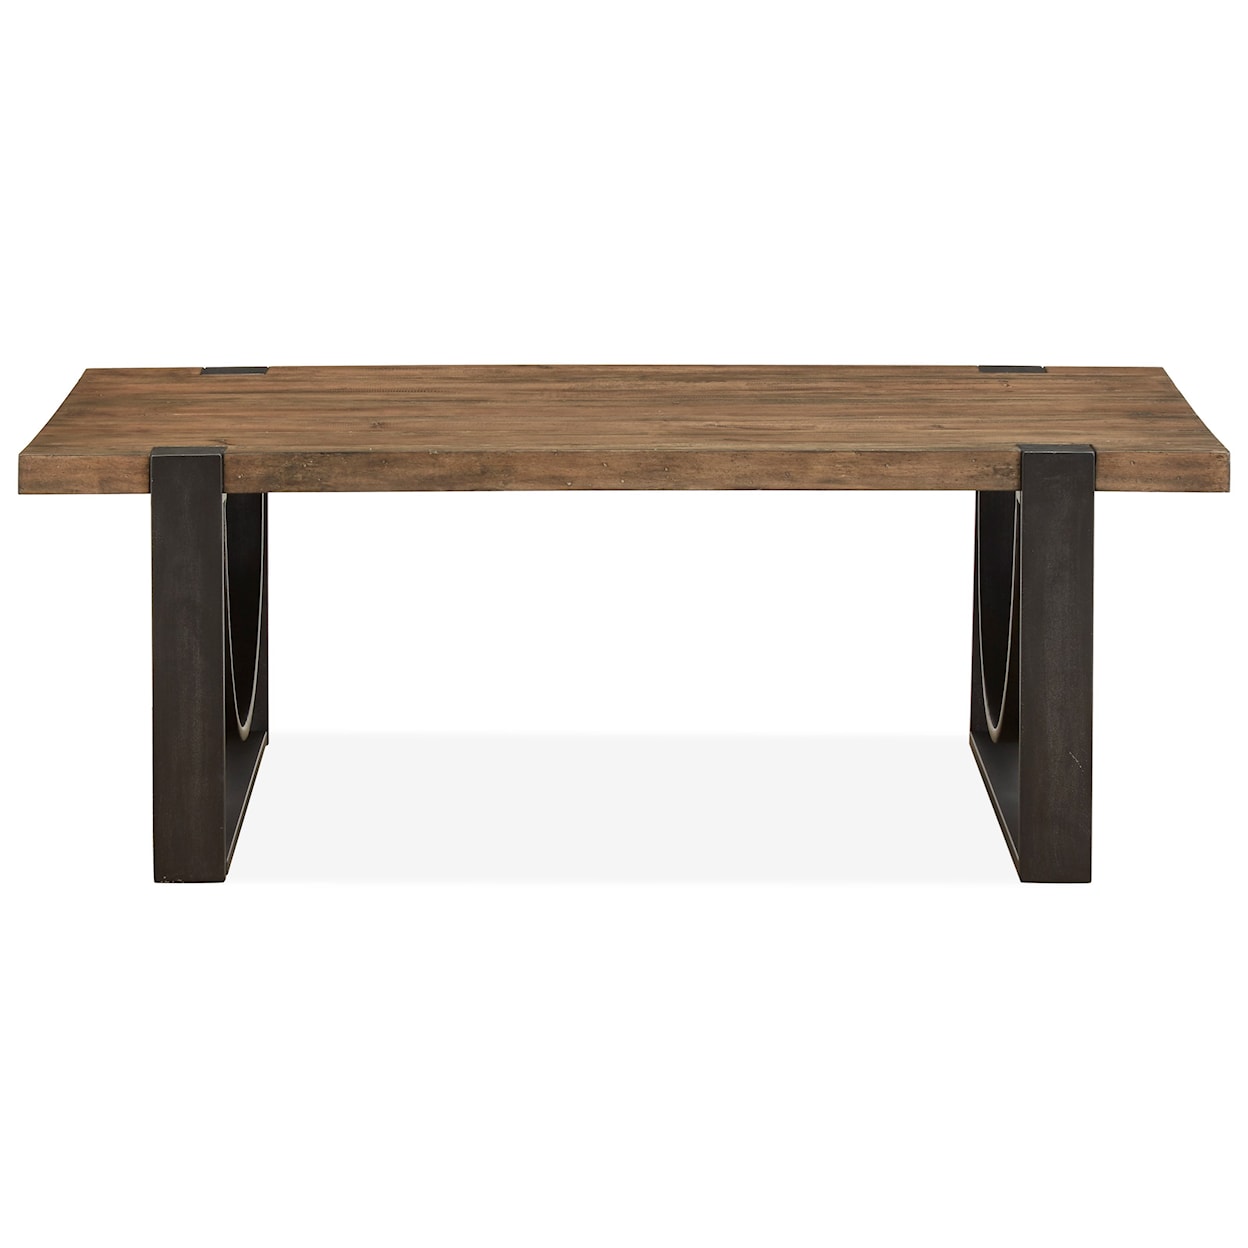 Magnussen Home Bowden Occasional Tables Rectangular Cocktail Table